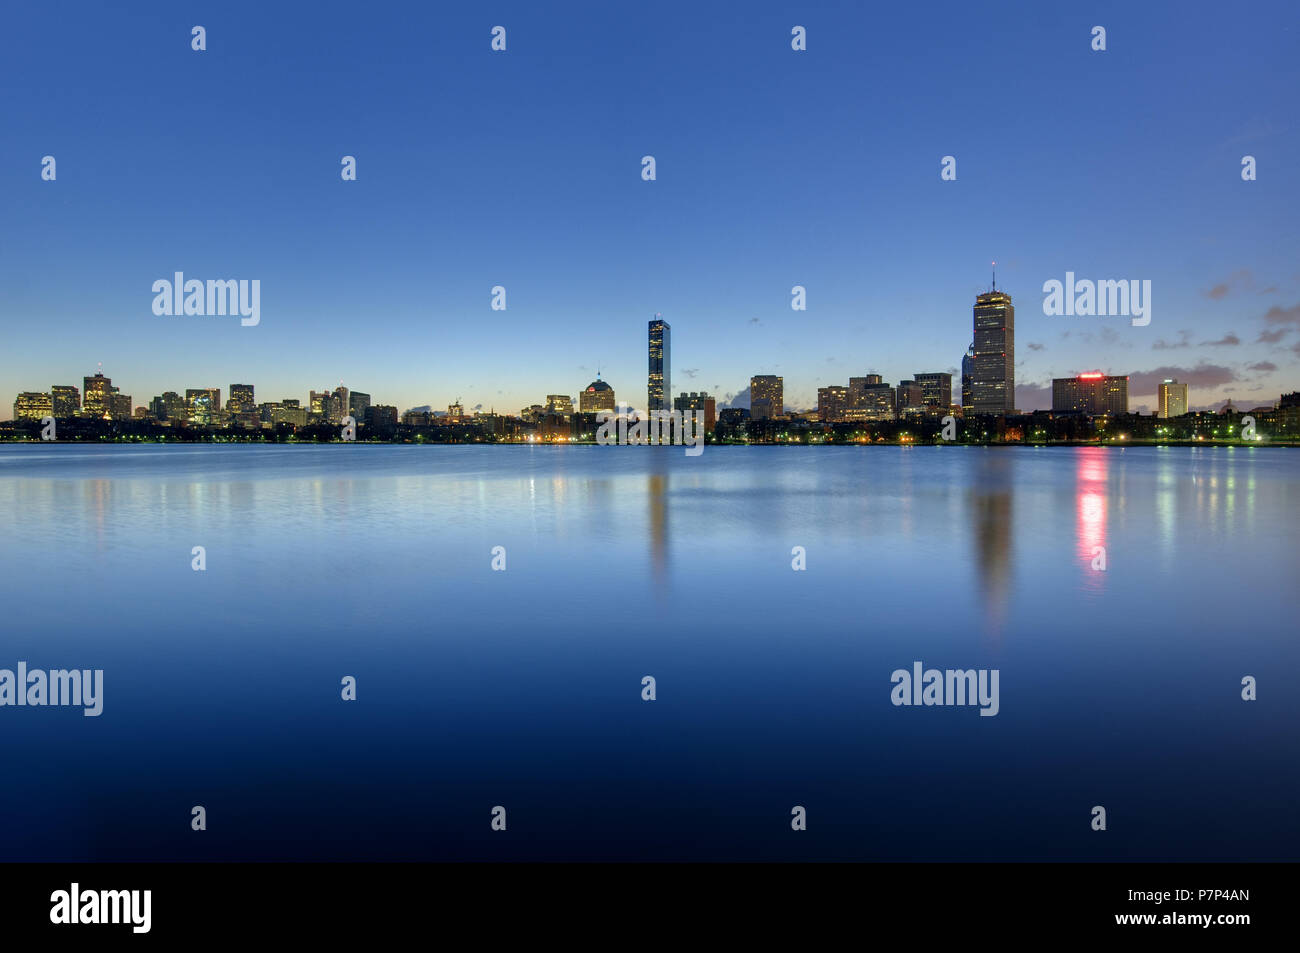 Skyline of Boston's Back Bay area seen at dawn Stock Photo